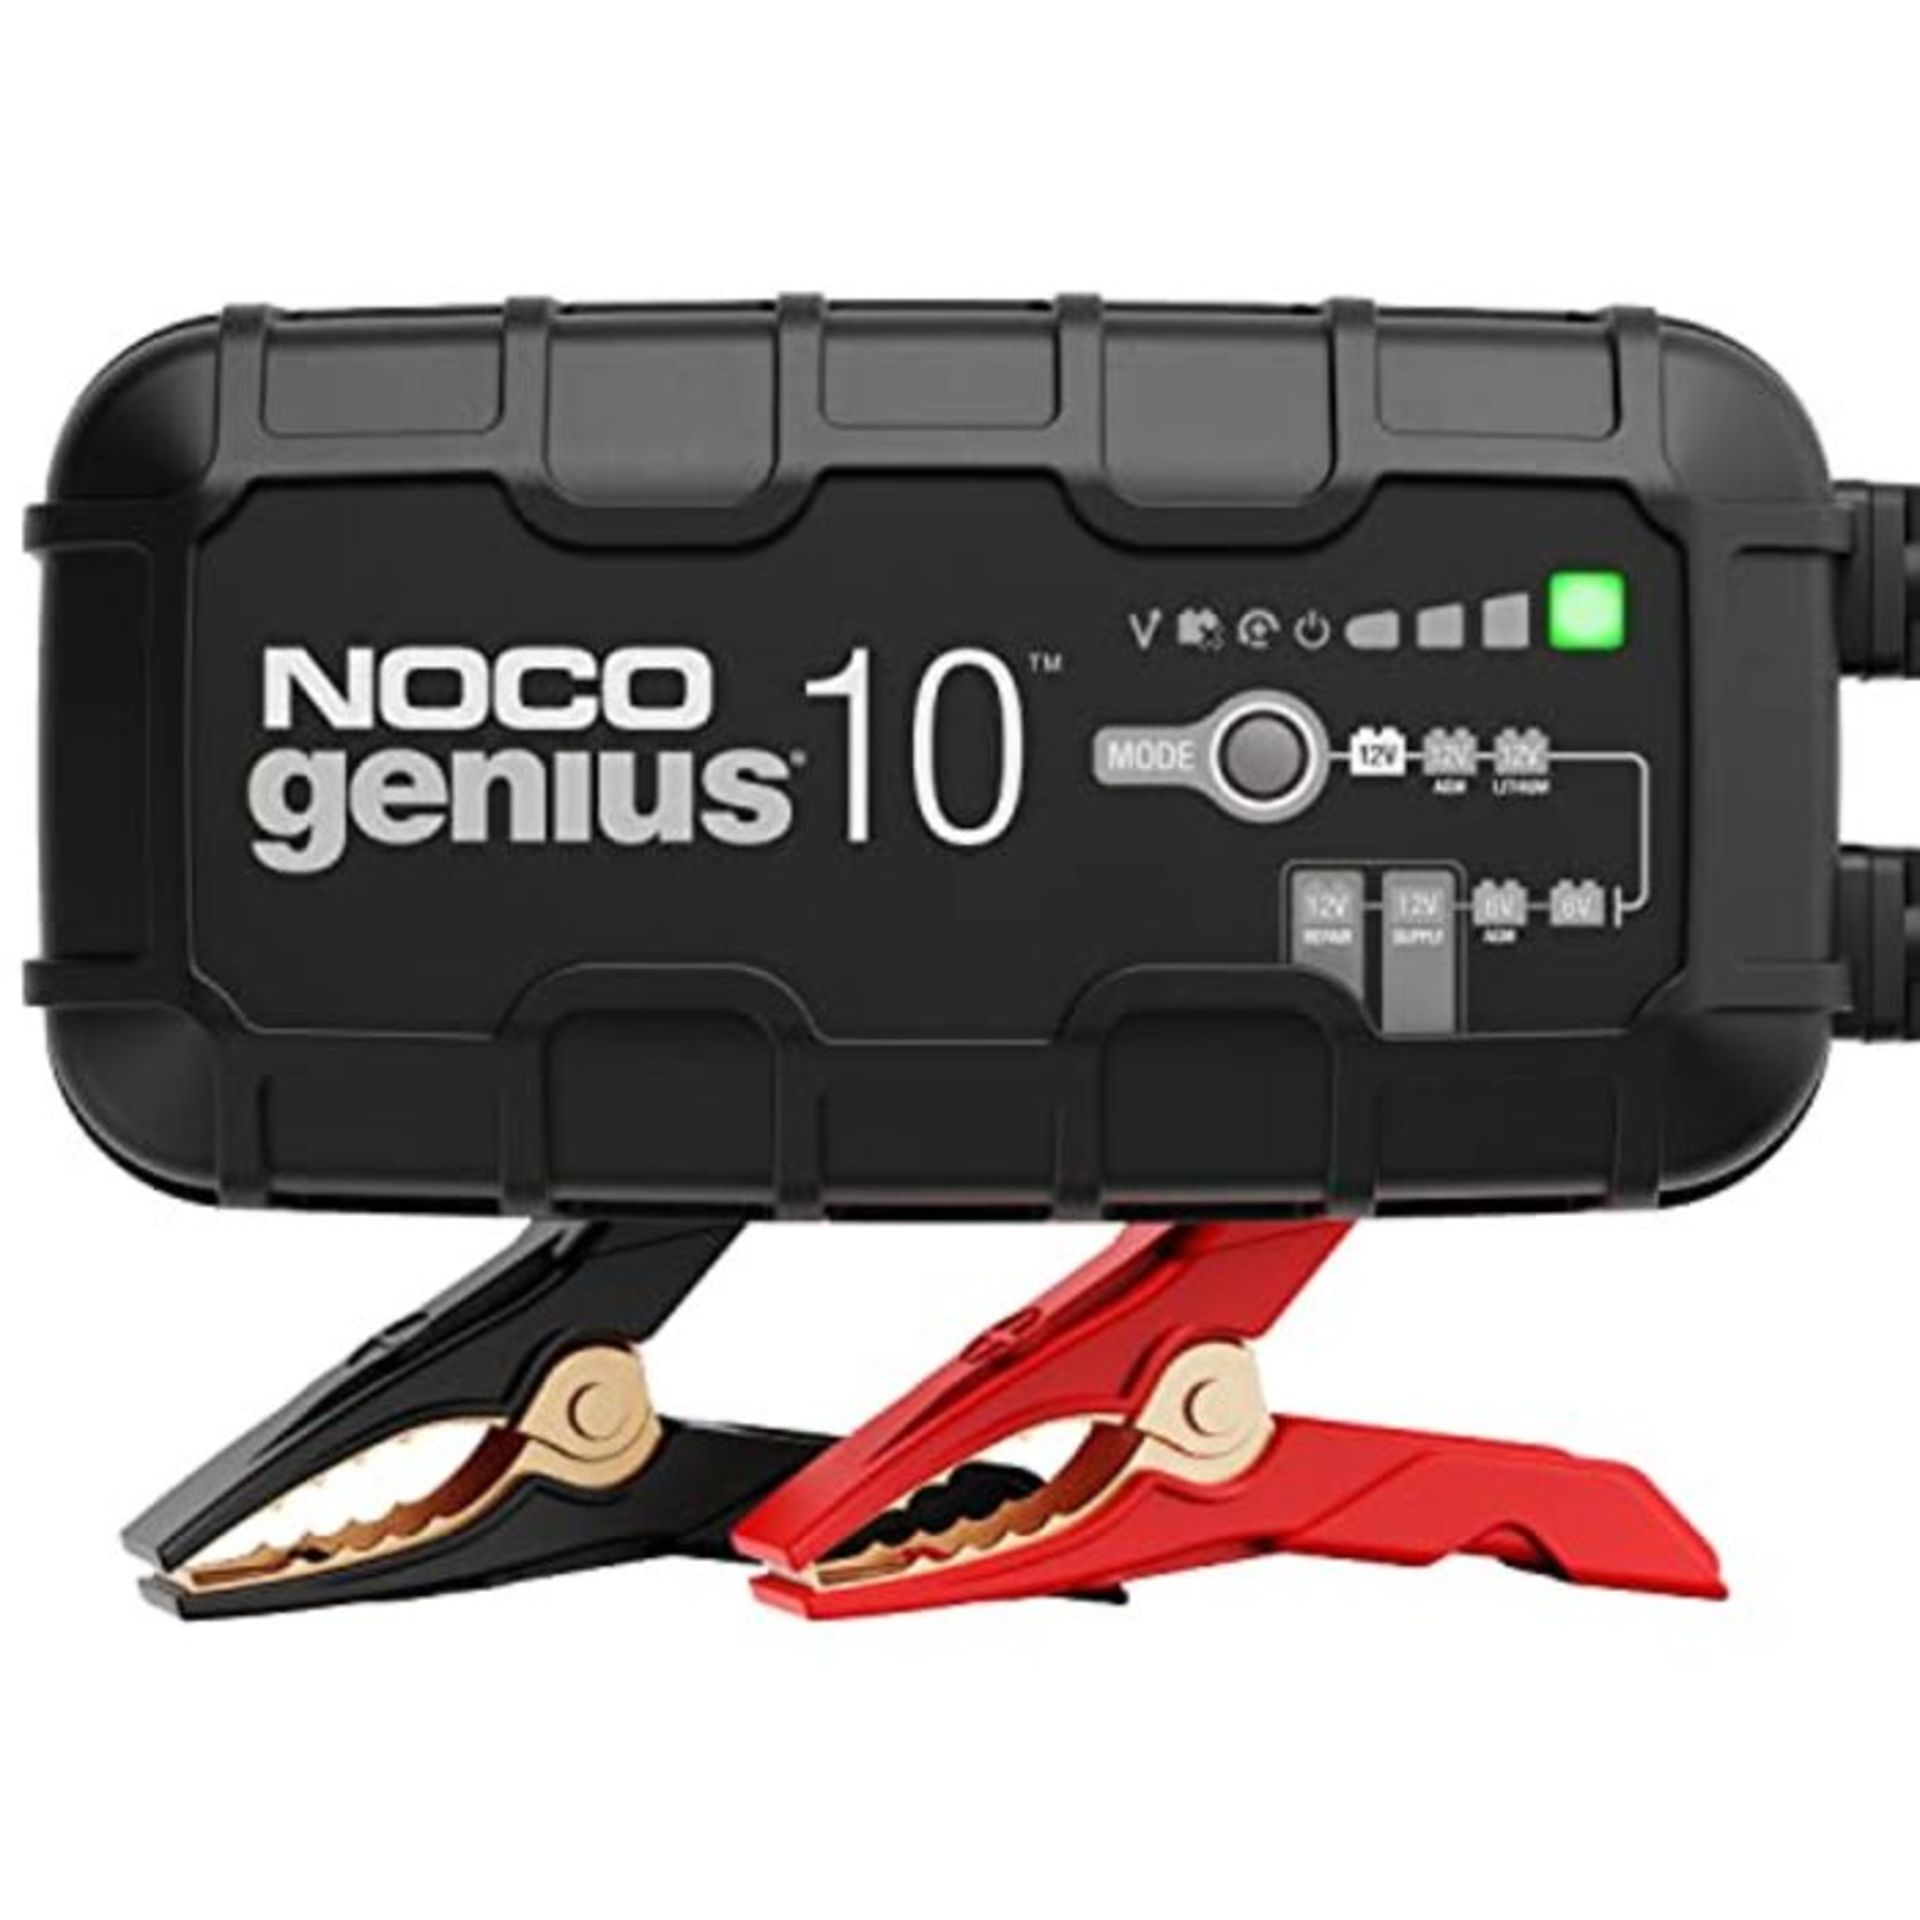 RRP £109.00 NOCO GENIUS10UK, 10A Smart Car Charger, 6V and 12V Portable Heavy-Duty Battery Charger